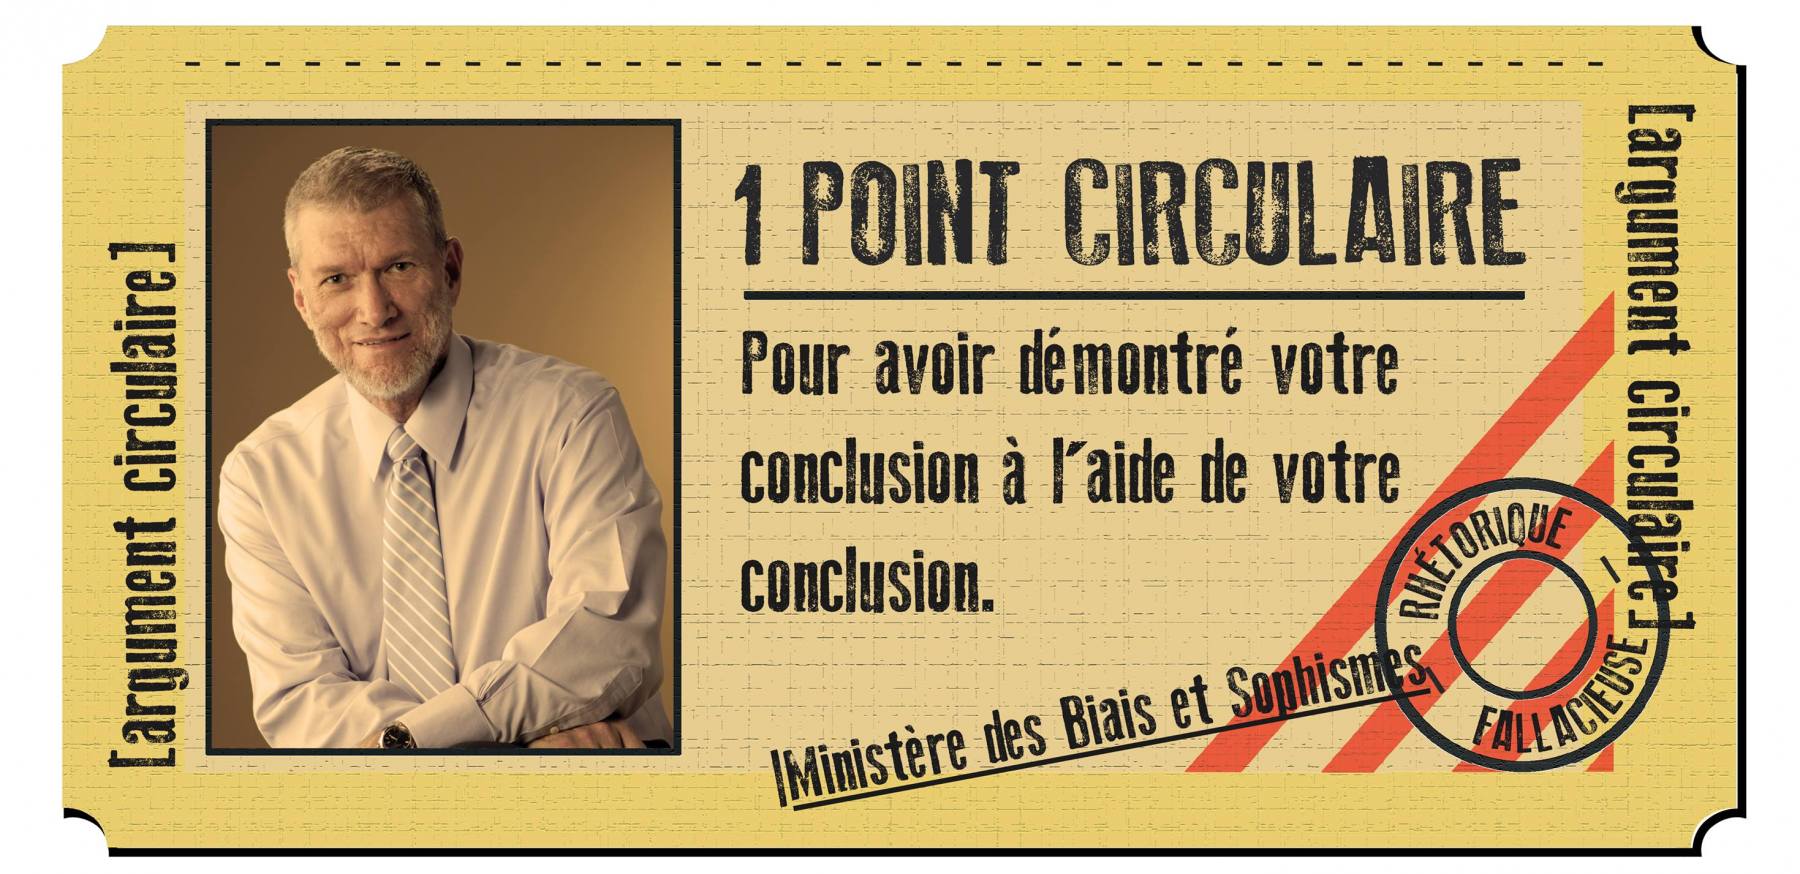 ![...](http://img.ikilote.net/img/1_point_circulaire.jpg =x100)